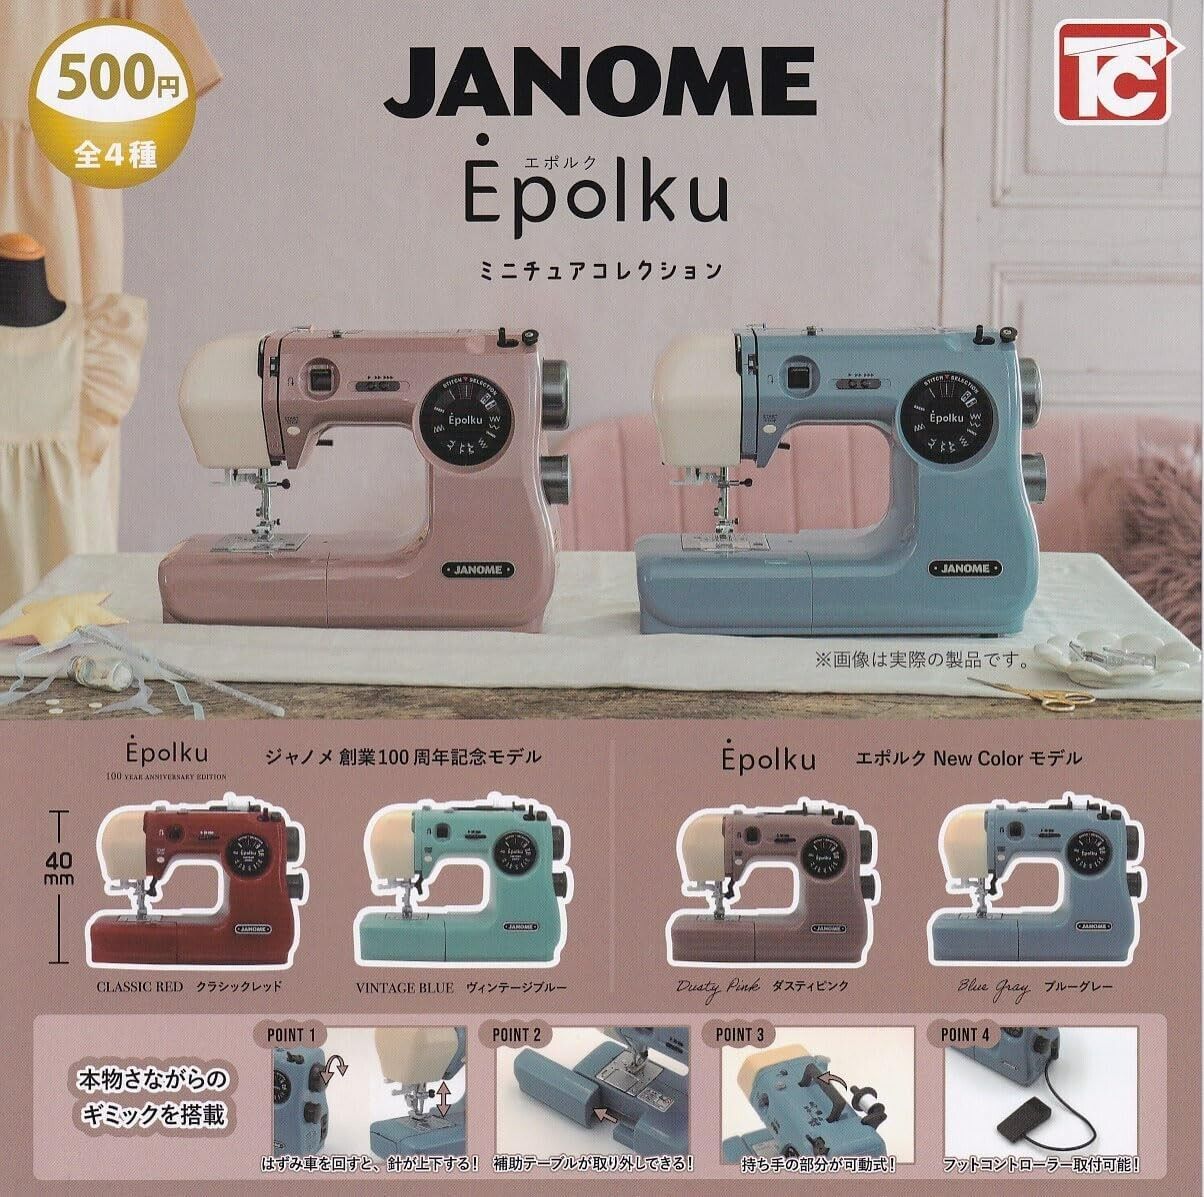 JANOME Epolku Miniature Collection 4 Types Complete Set Capsule Toy Japan